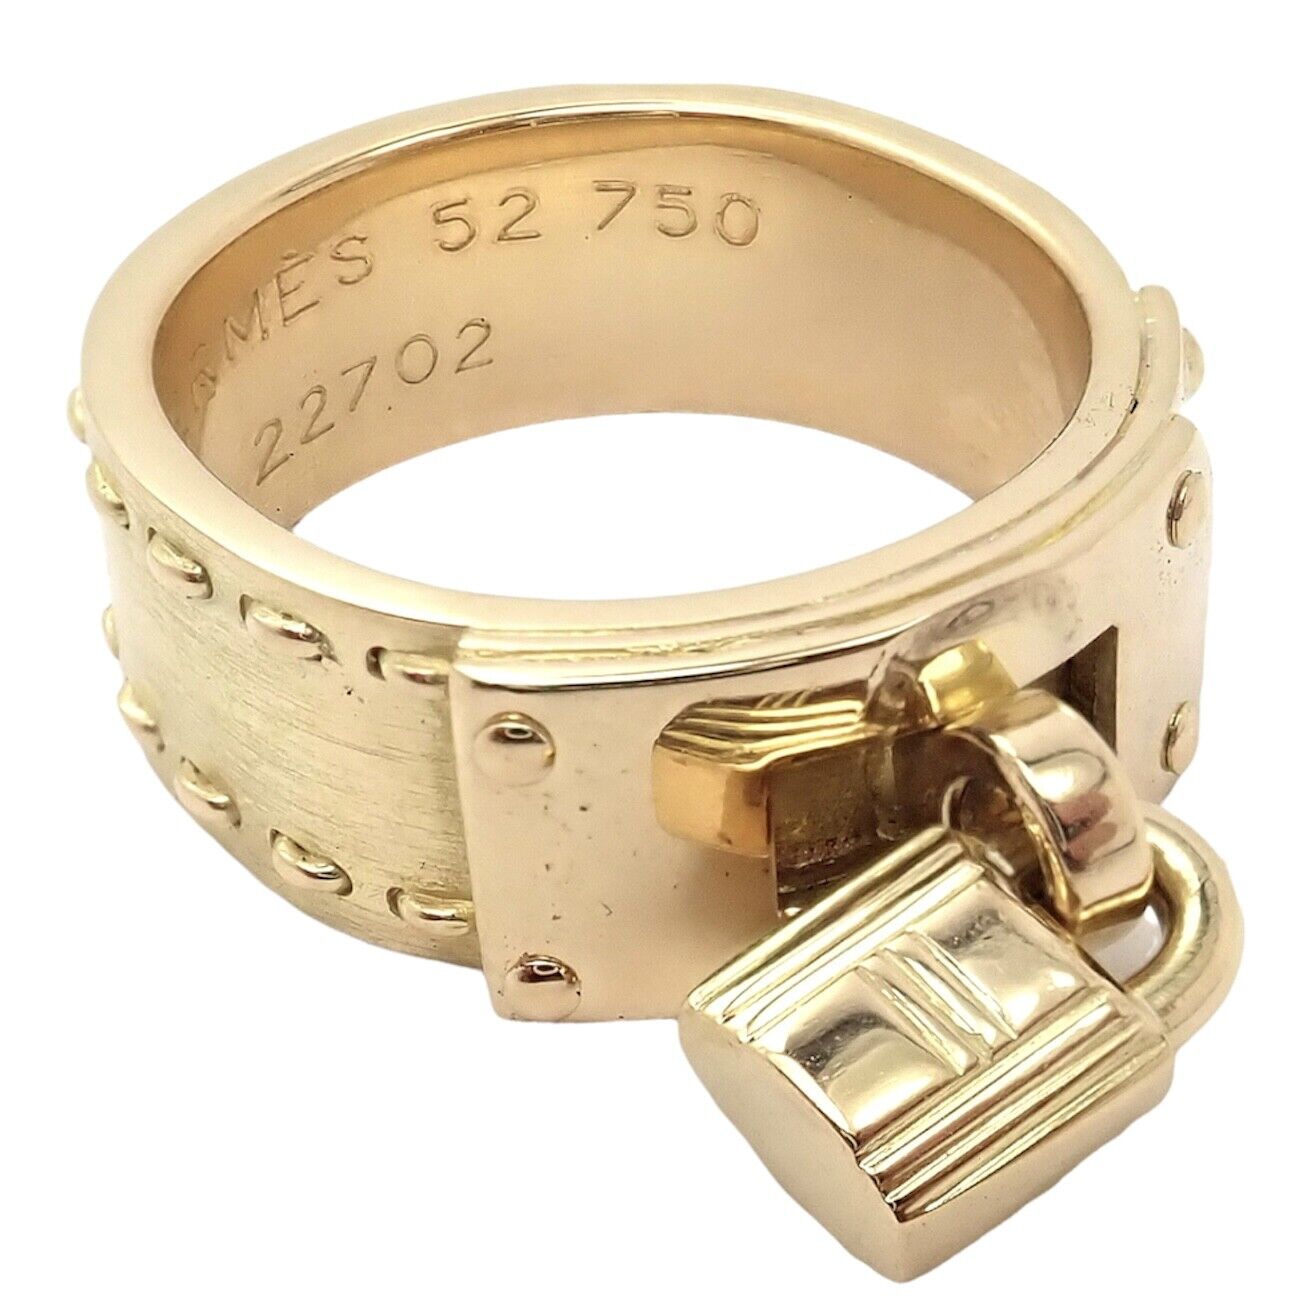 Hermes Jewelry & Watches:Fine Jewelry:Rings Rare! Authentic Vintage Hermes 18k Yellow Gold "H" Lock Band Ring Size 52